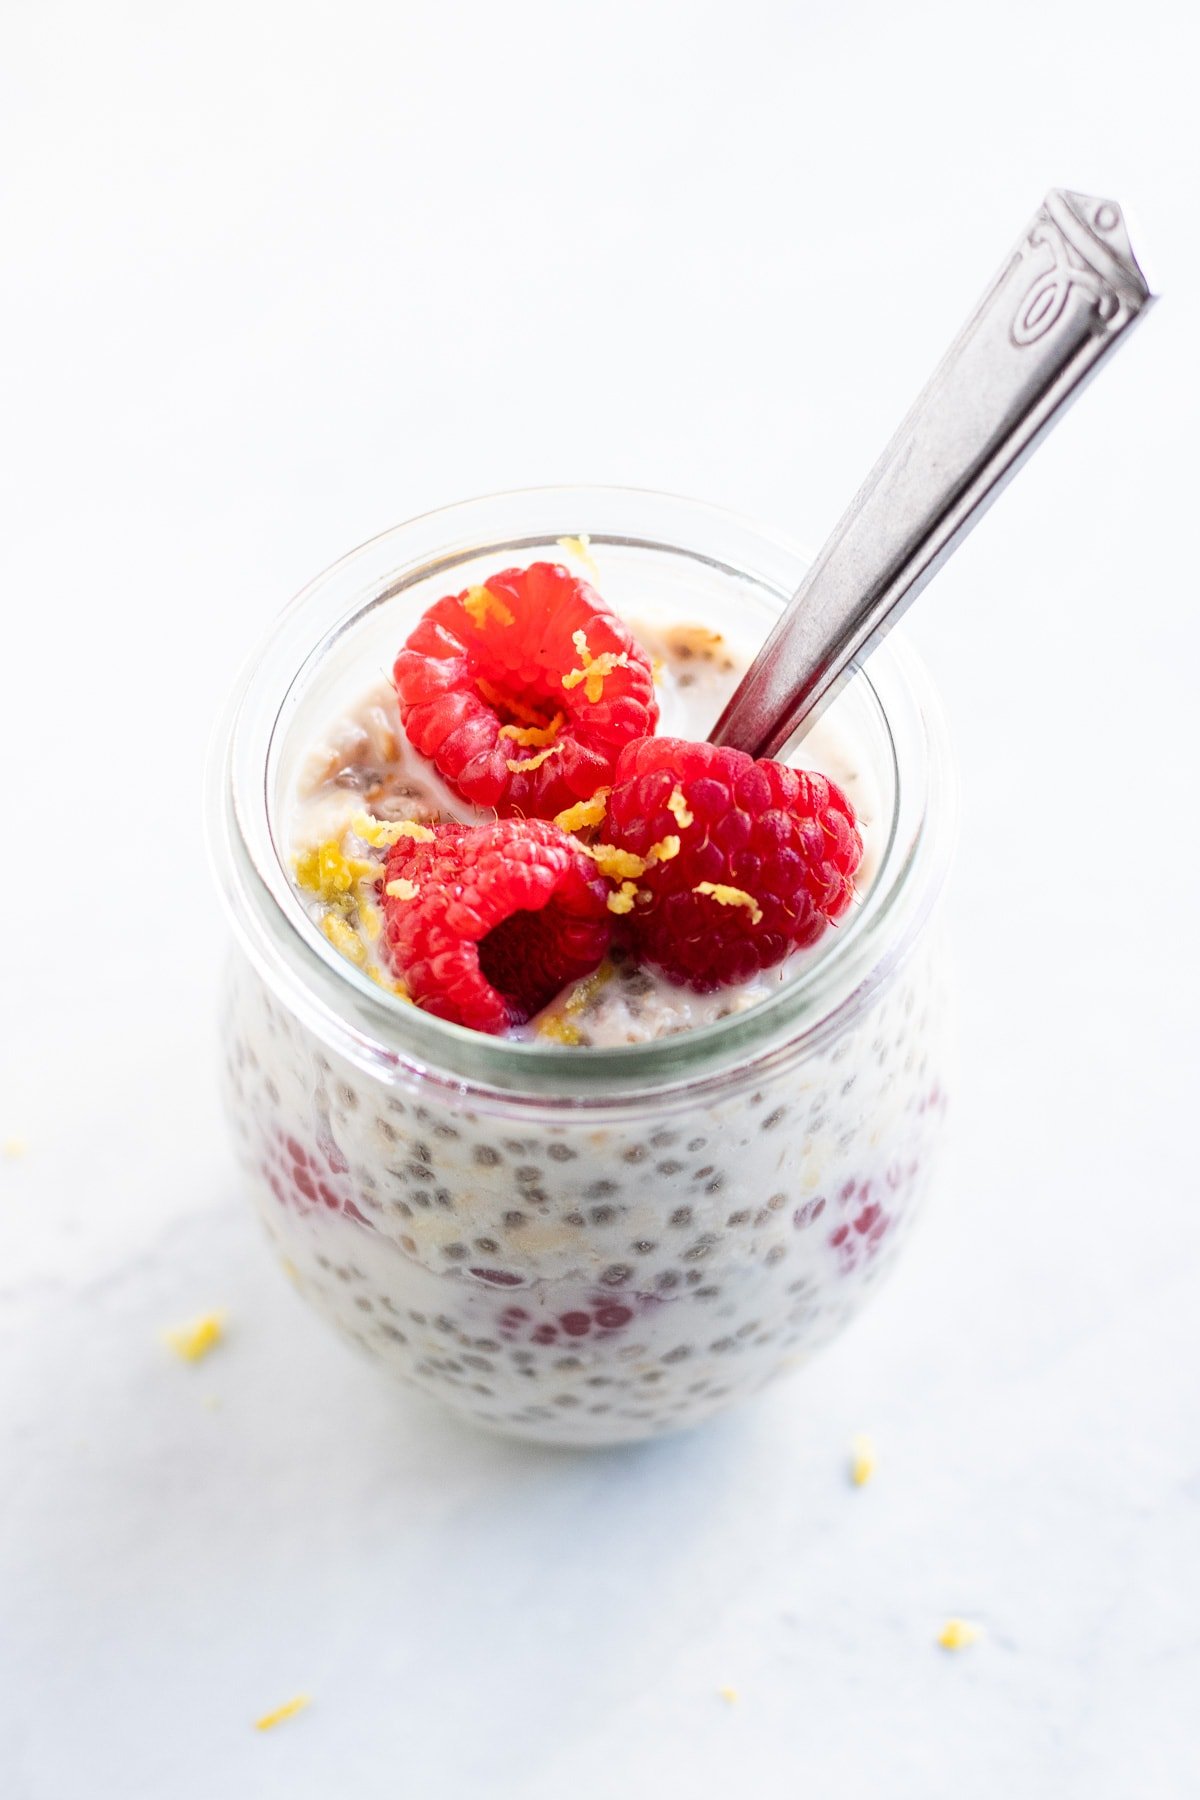 A glass tulip jar is filled with low FODMAP lemon raspberry overnight oats. Juicy raspberries flecked with fresh lemon zest sit on top. There's a spoon ready for you to dig into this easy low FODMAP breakfast!